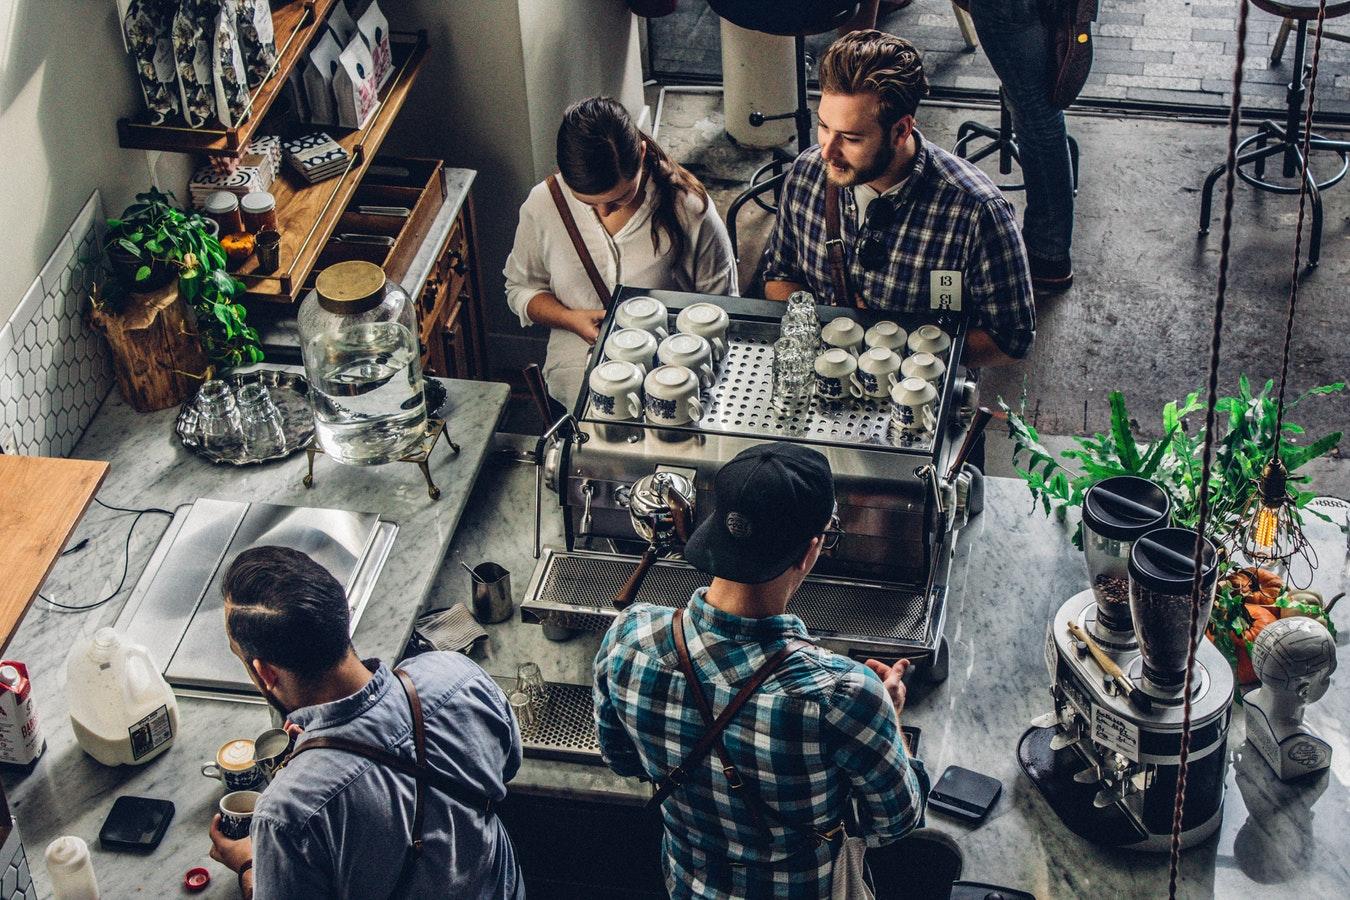 Overhead view of a coffee shop with people waiting for their coffee order